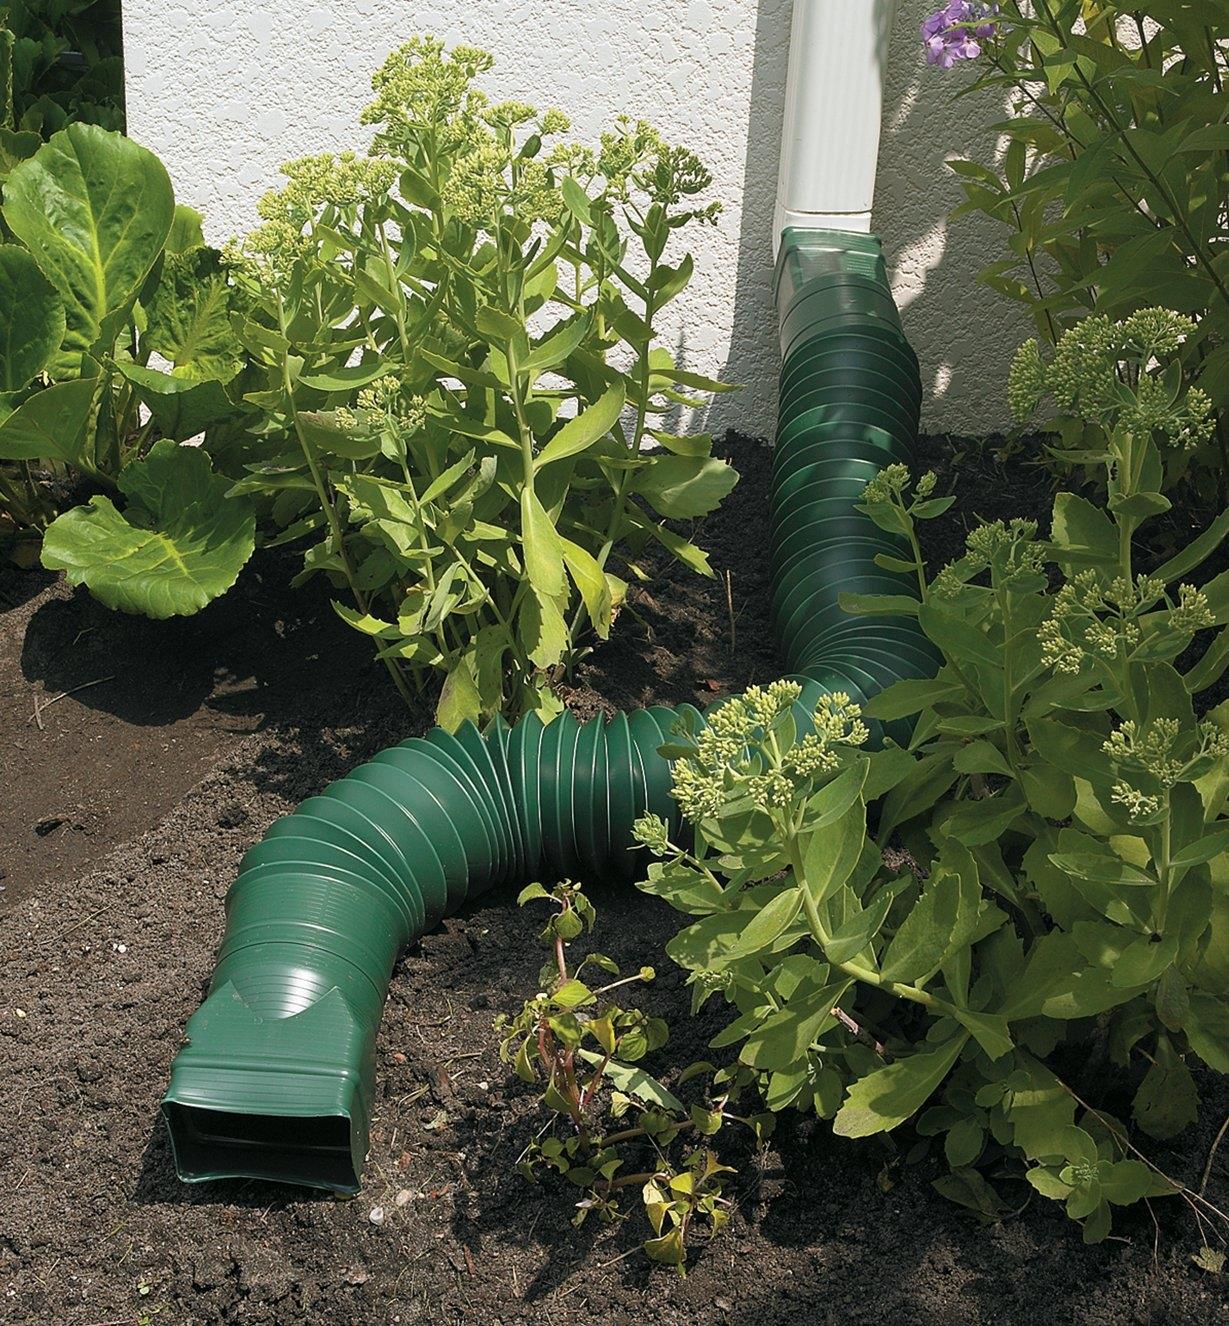 Green Downspout Diverter attached to a downspout, diverting water flow away from a garden